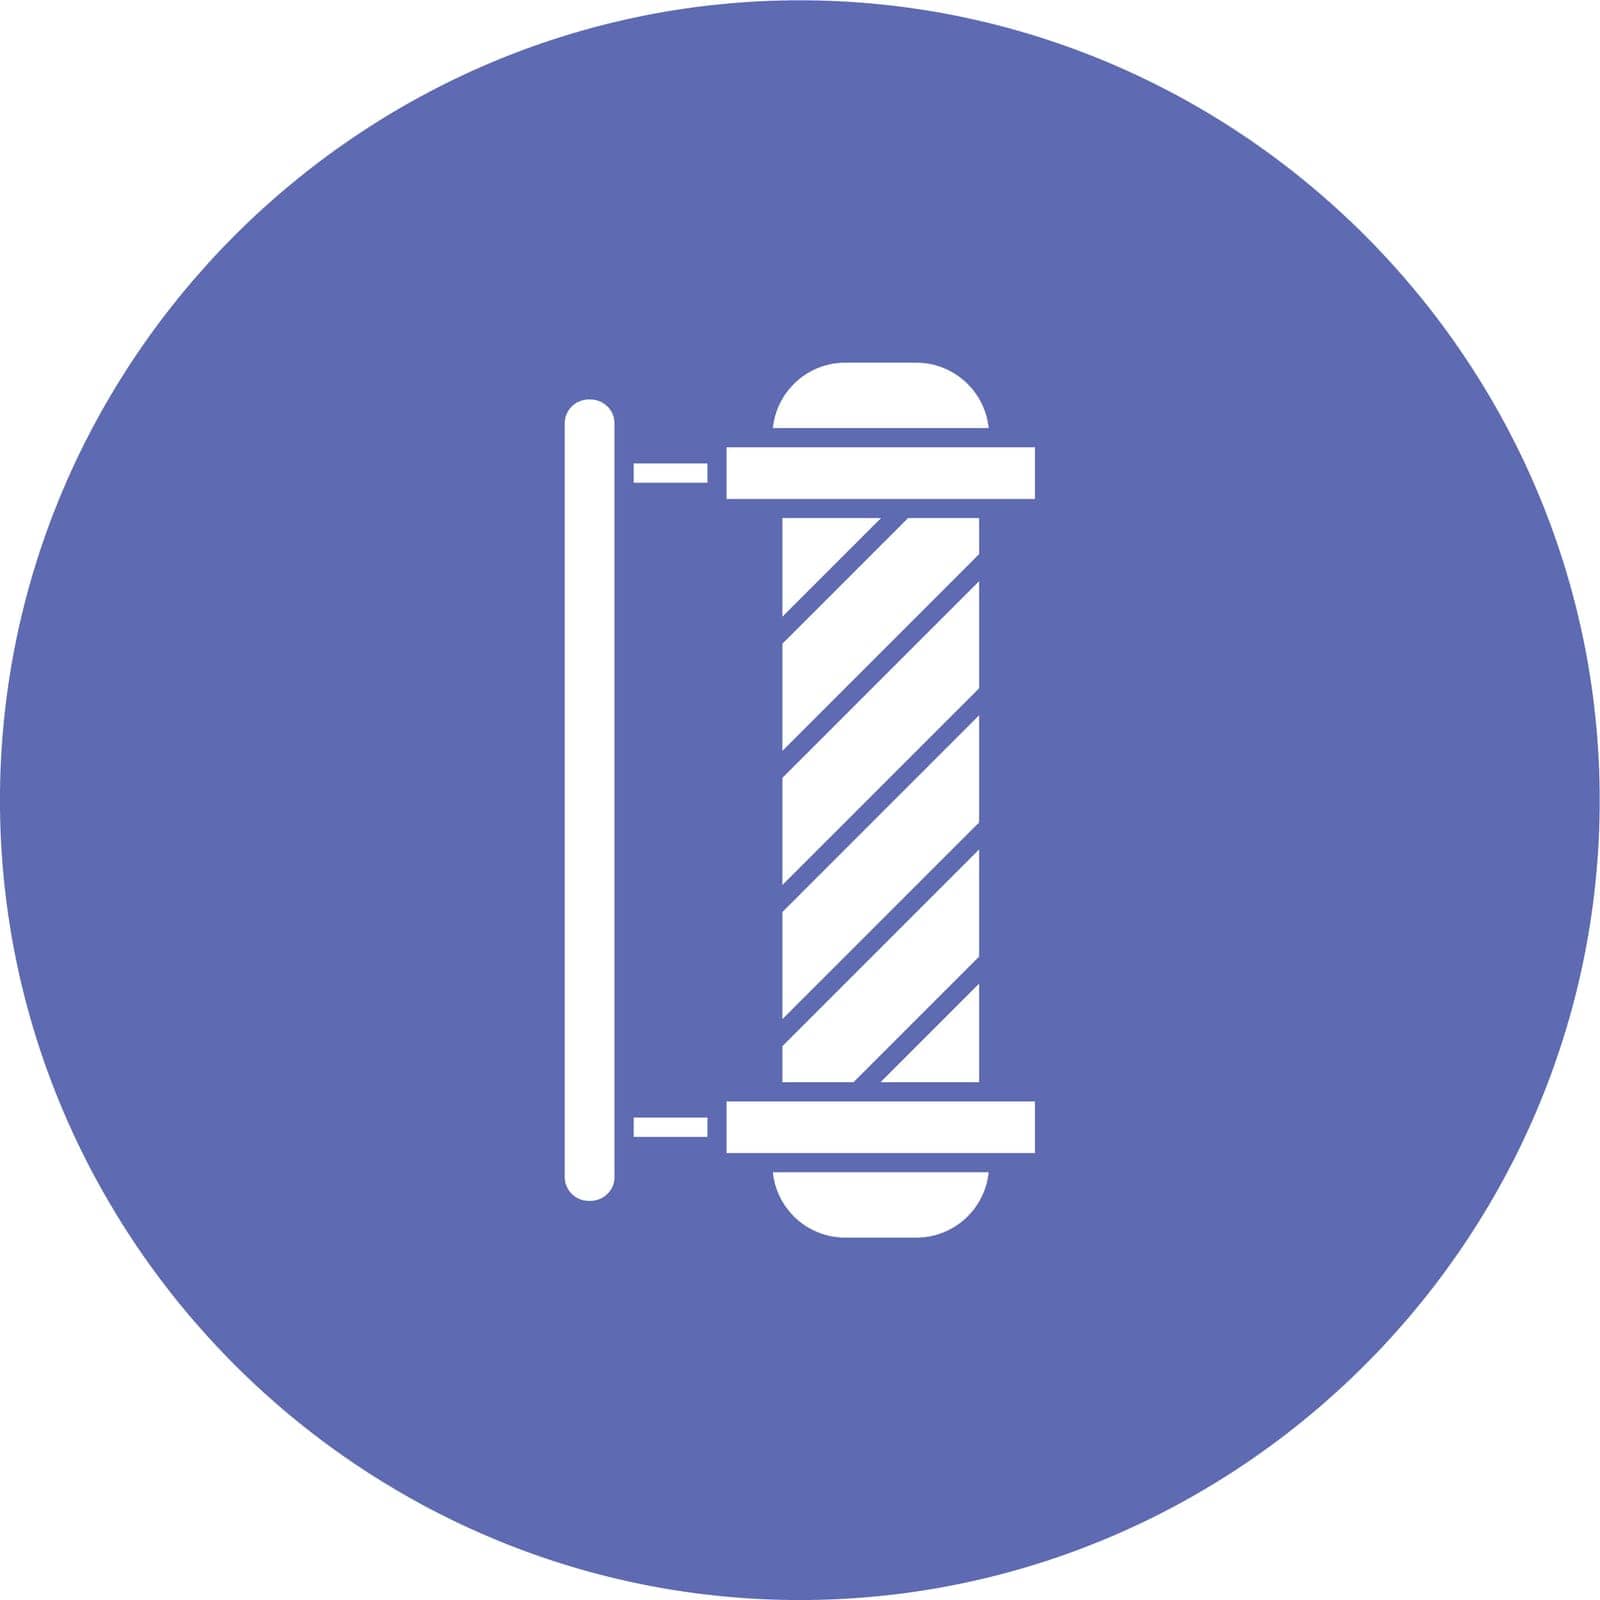 Barber Pole icon vector image. by ICONBUNNY